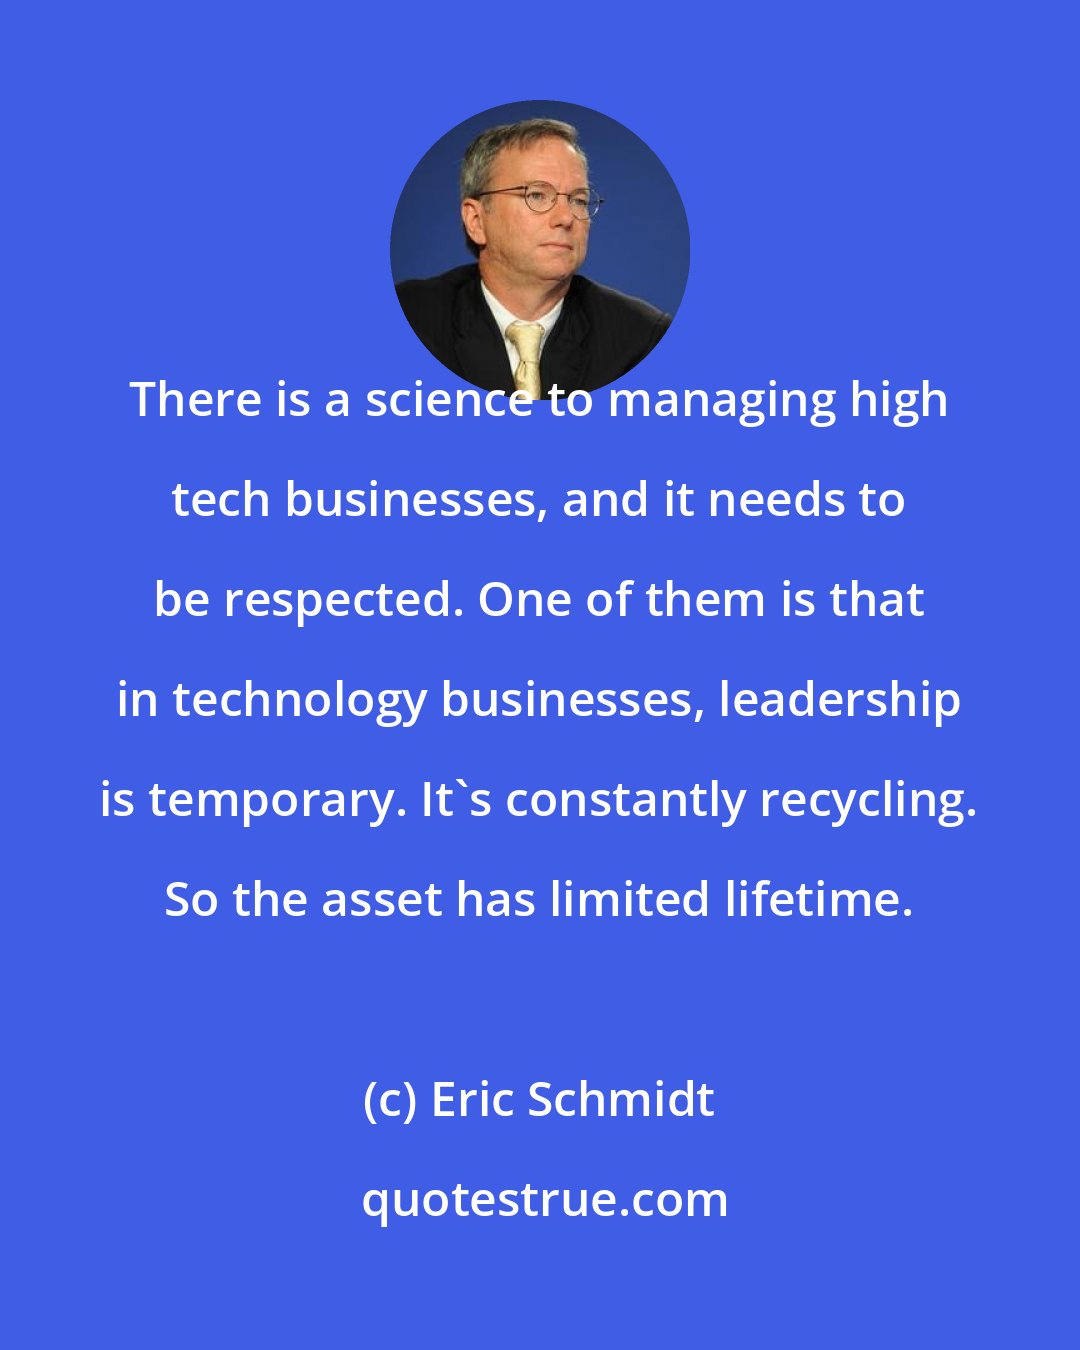 Eric Schmidt: There is a science to managing high tech businesses, and it needs to be respected. One of them is that in technology businesses, leadership is temporary. It's constantly recycling. So the asset has limited lifetime.